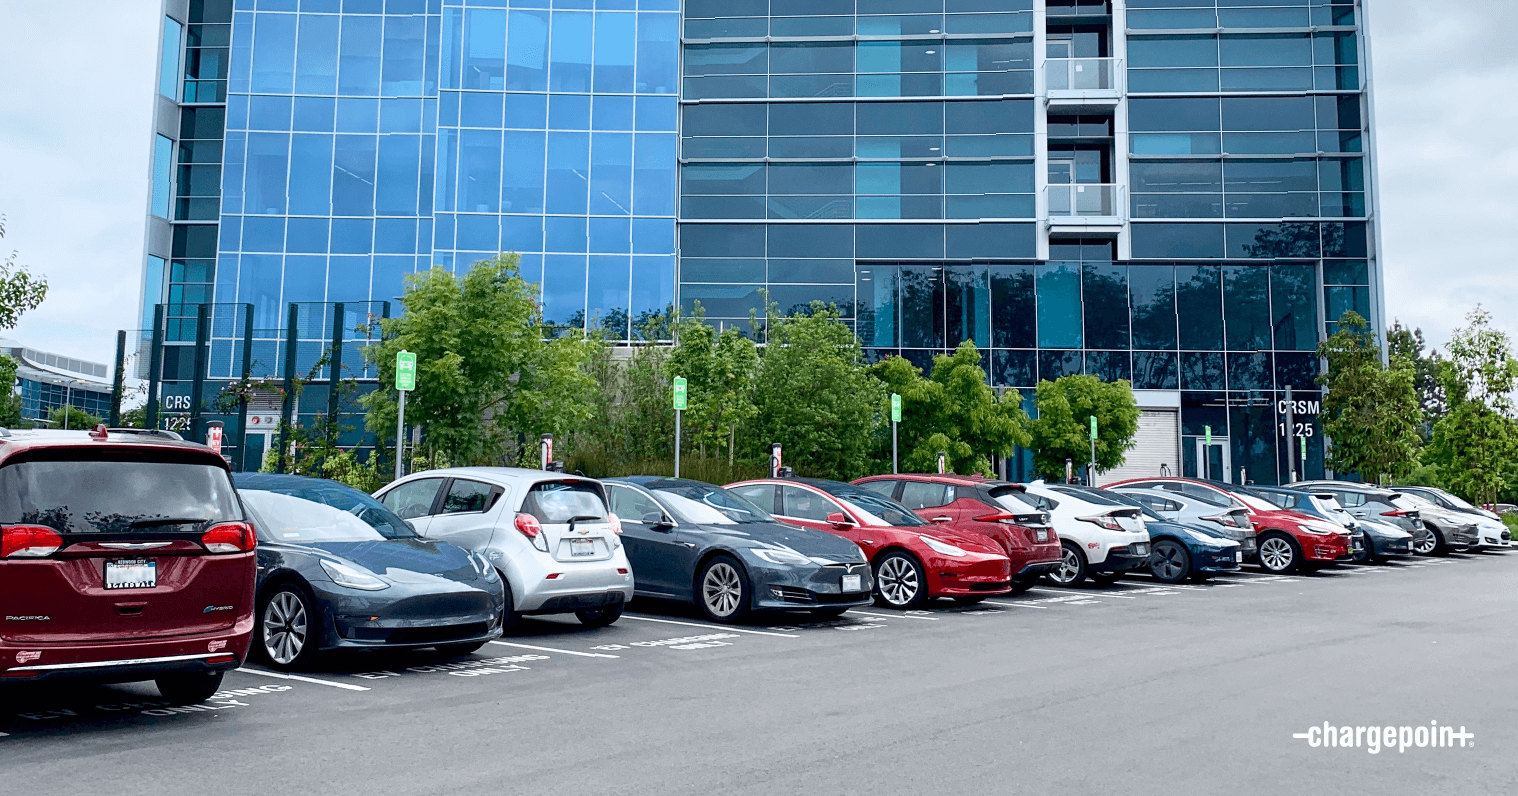 Charging Electric Cars at Work